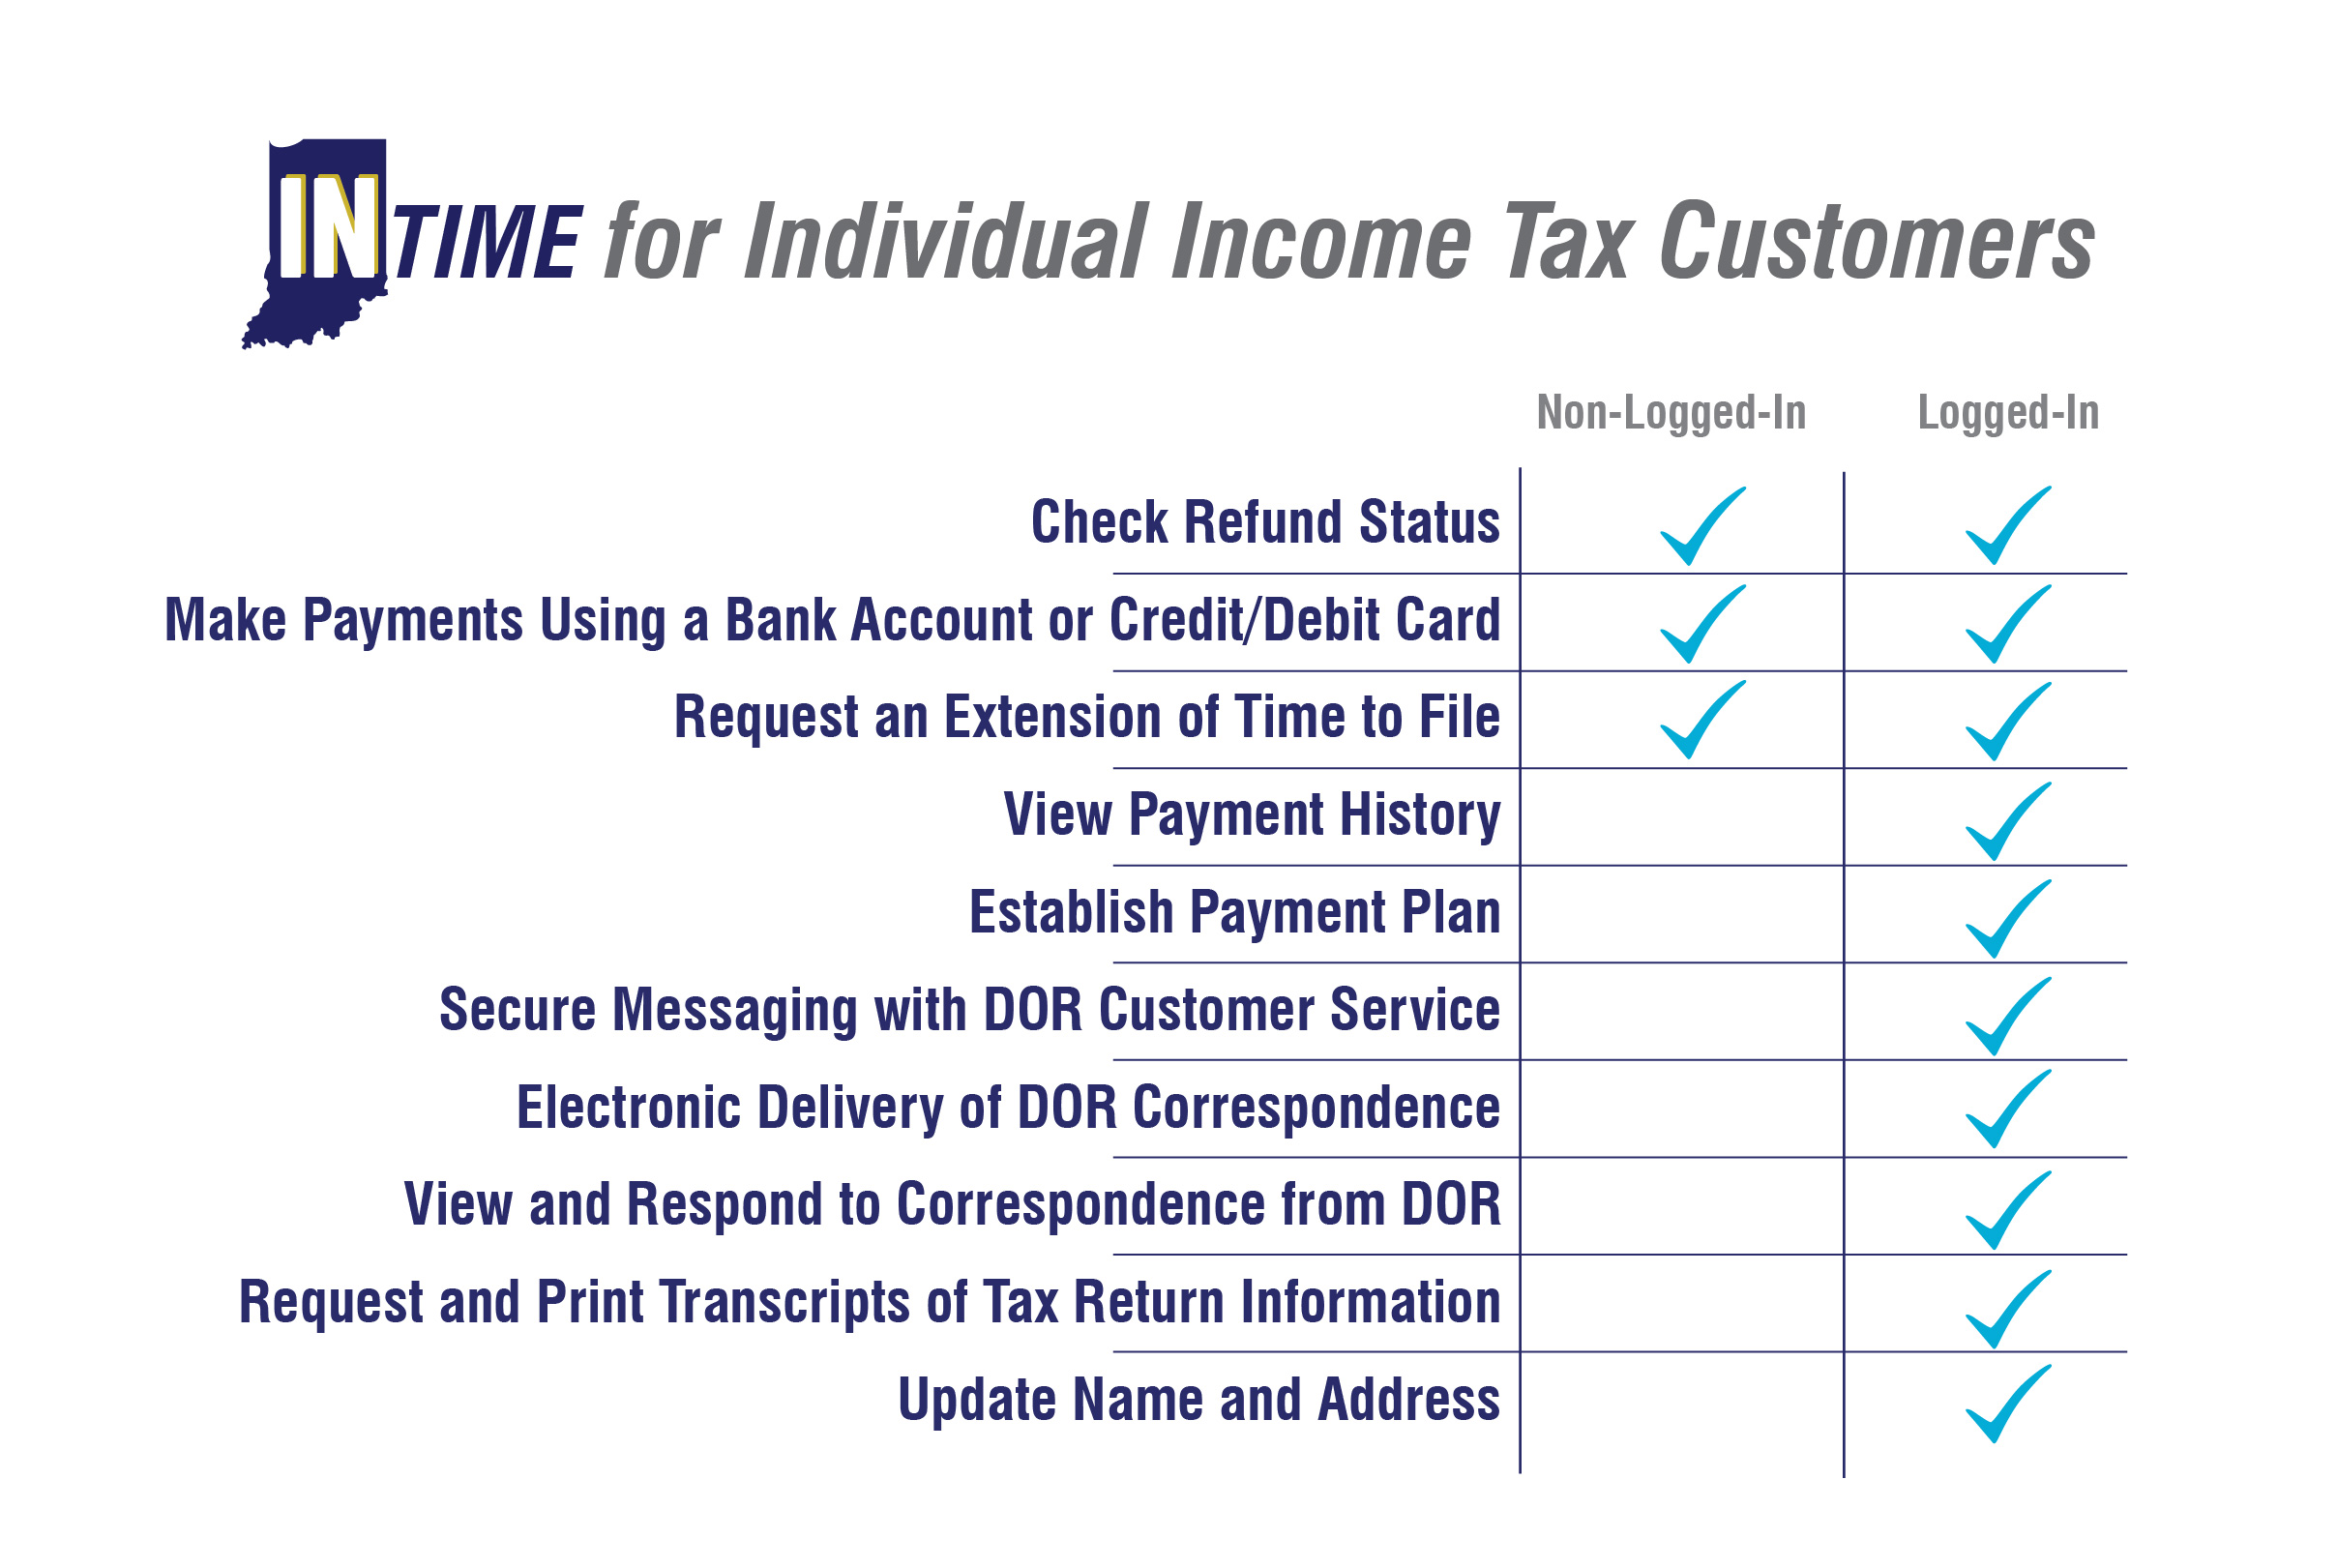 INTIME for Individual Income Tax Customers